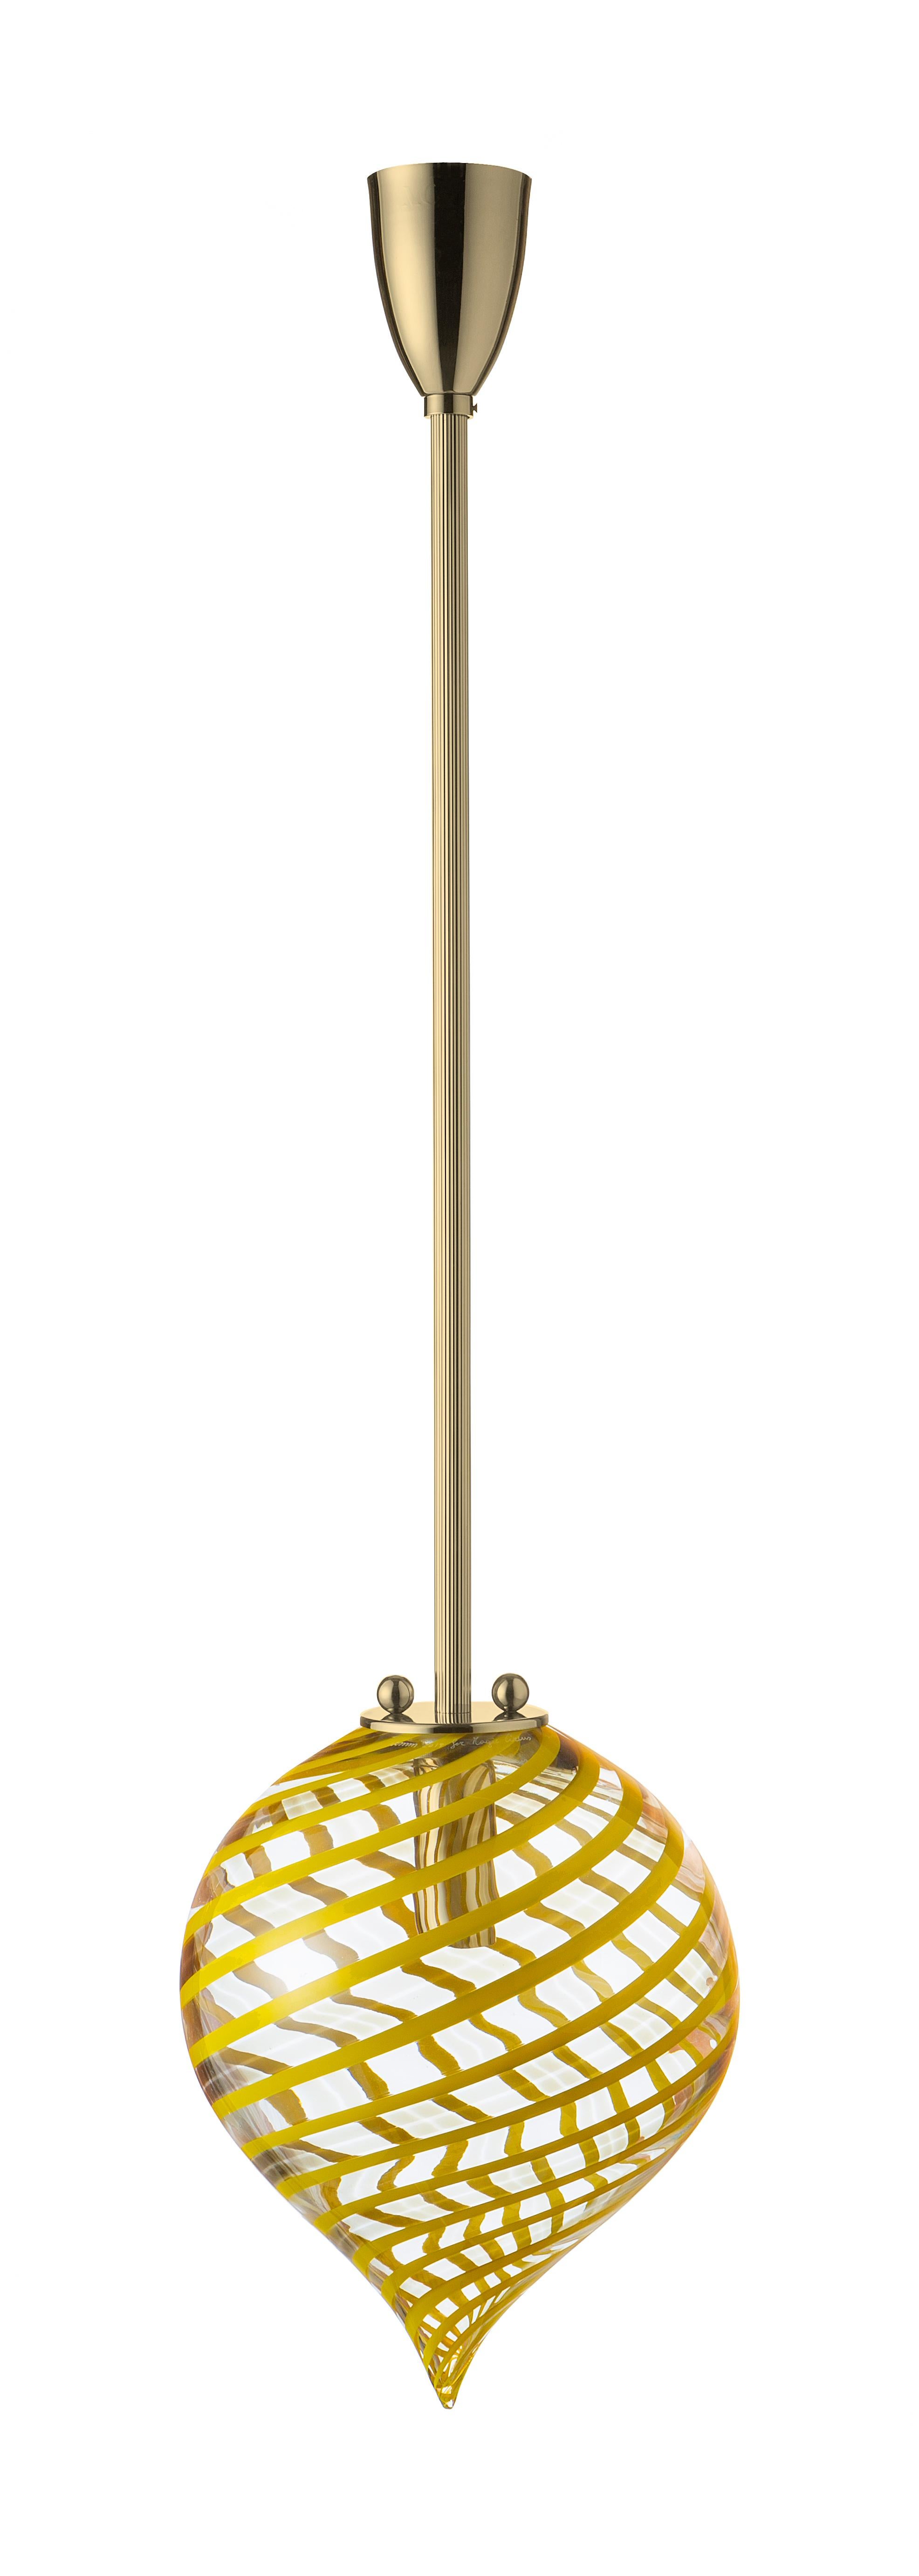 Senape Bianco pendant balloon canne by Magic Circus Editions
Dimensions: H 36 x W 27 x D 27 cm
Materials: fluted brass, mouth-blown glass
Colour: senape grigio

Available finishes: Brass, nickel
Available colours: rosa rosso, senape bianco,